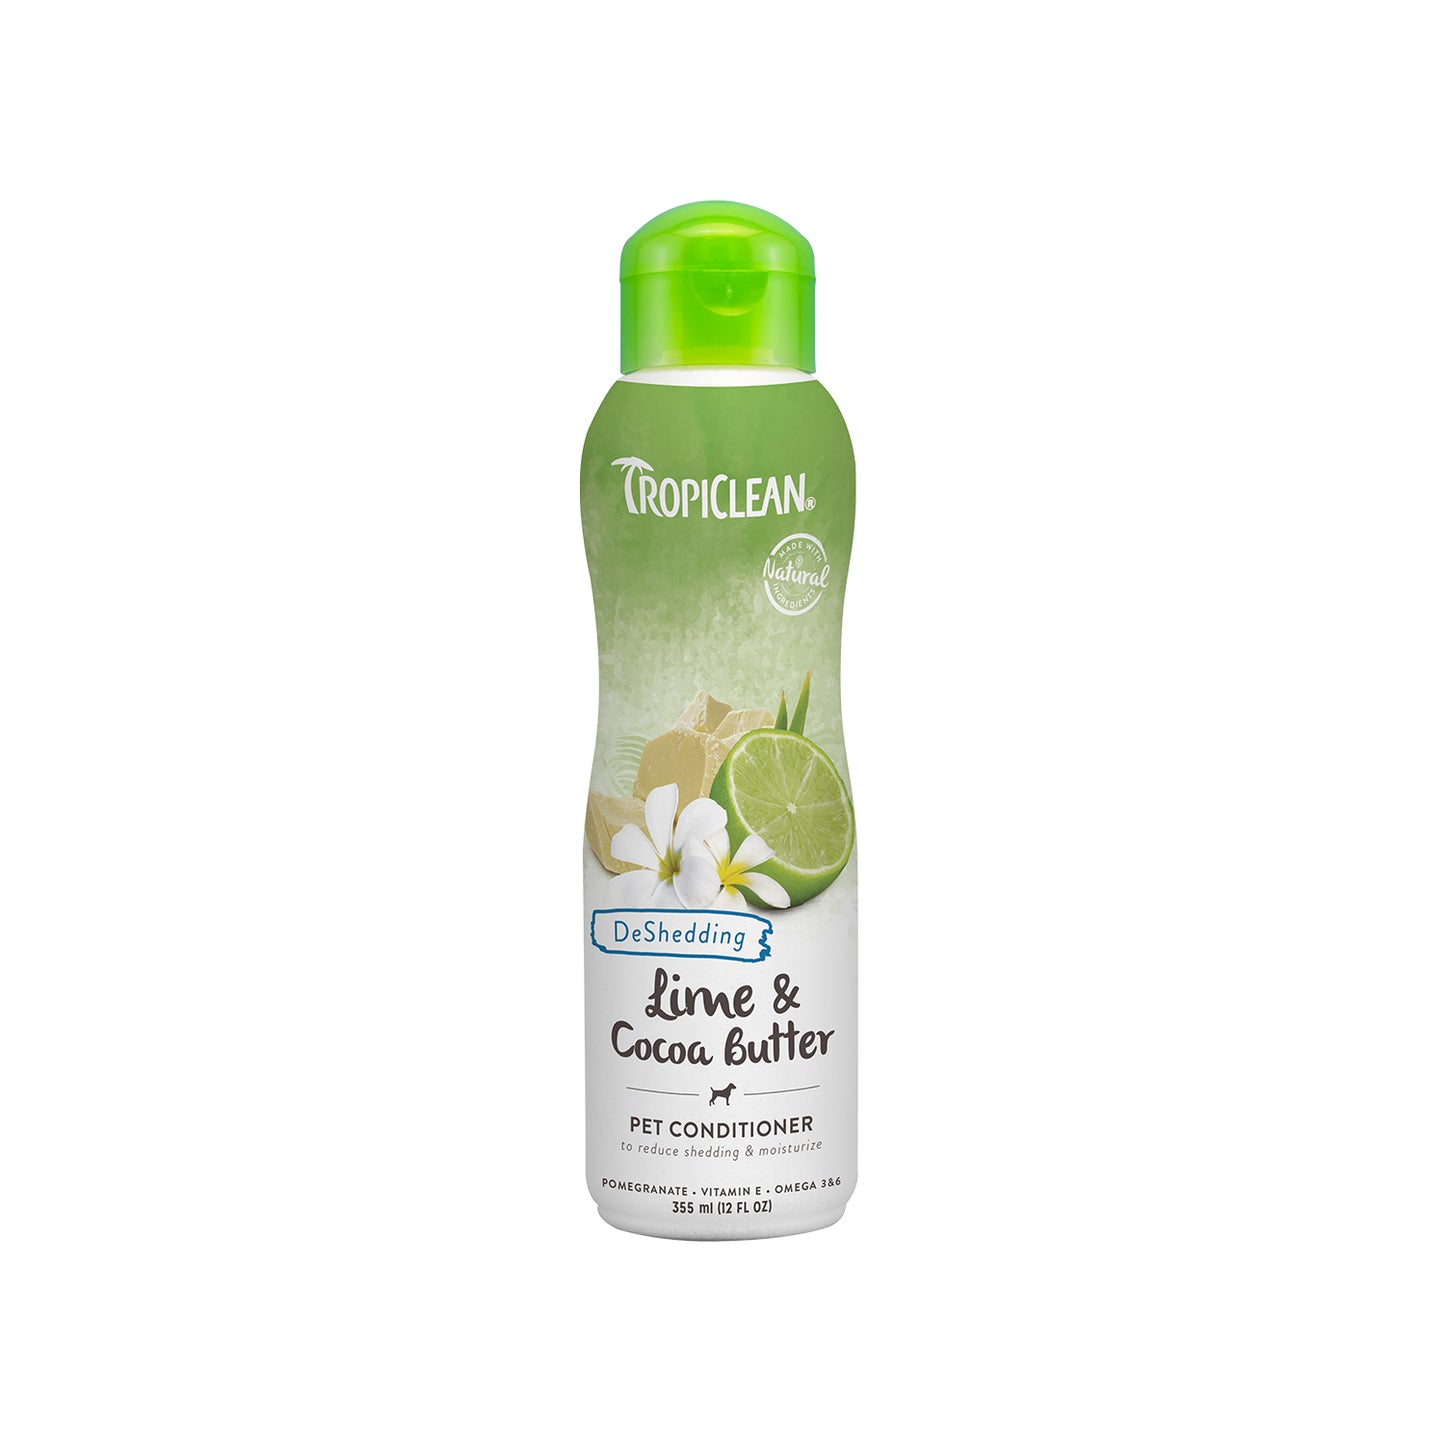 Tropiclean - Lime and Cocoa Butter Conditioner Deshedding For Dogs & Cats